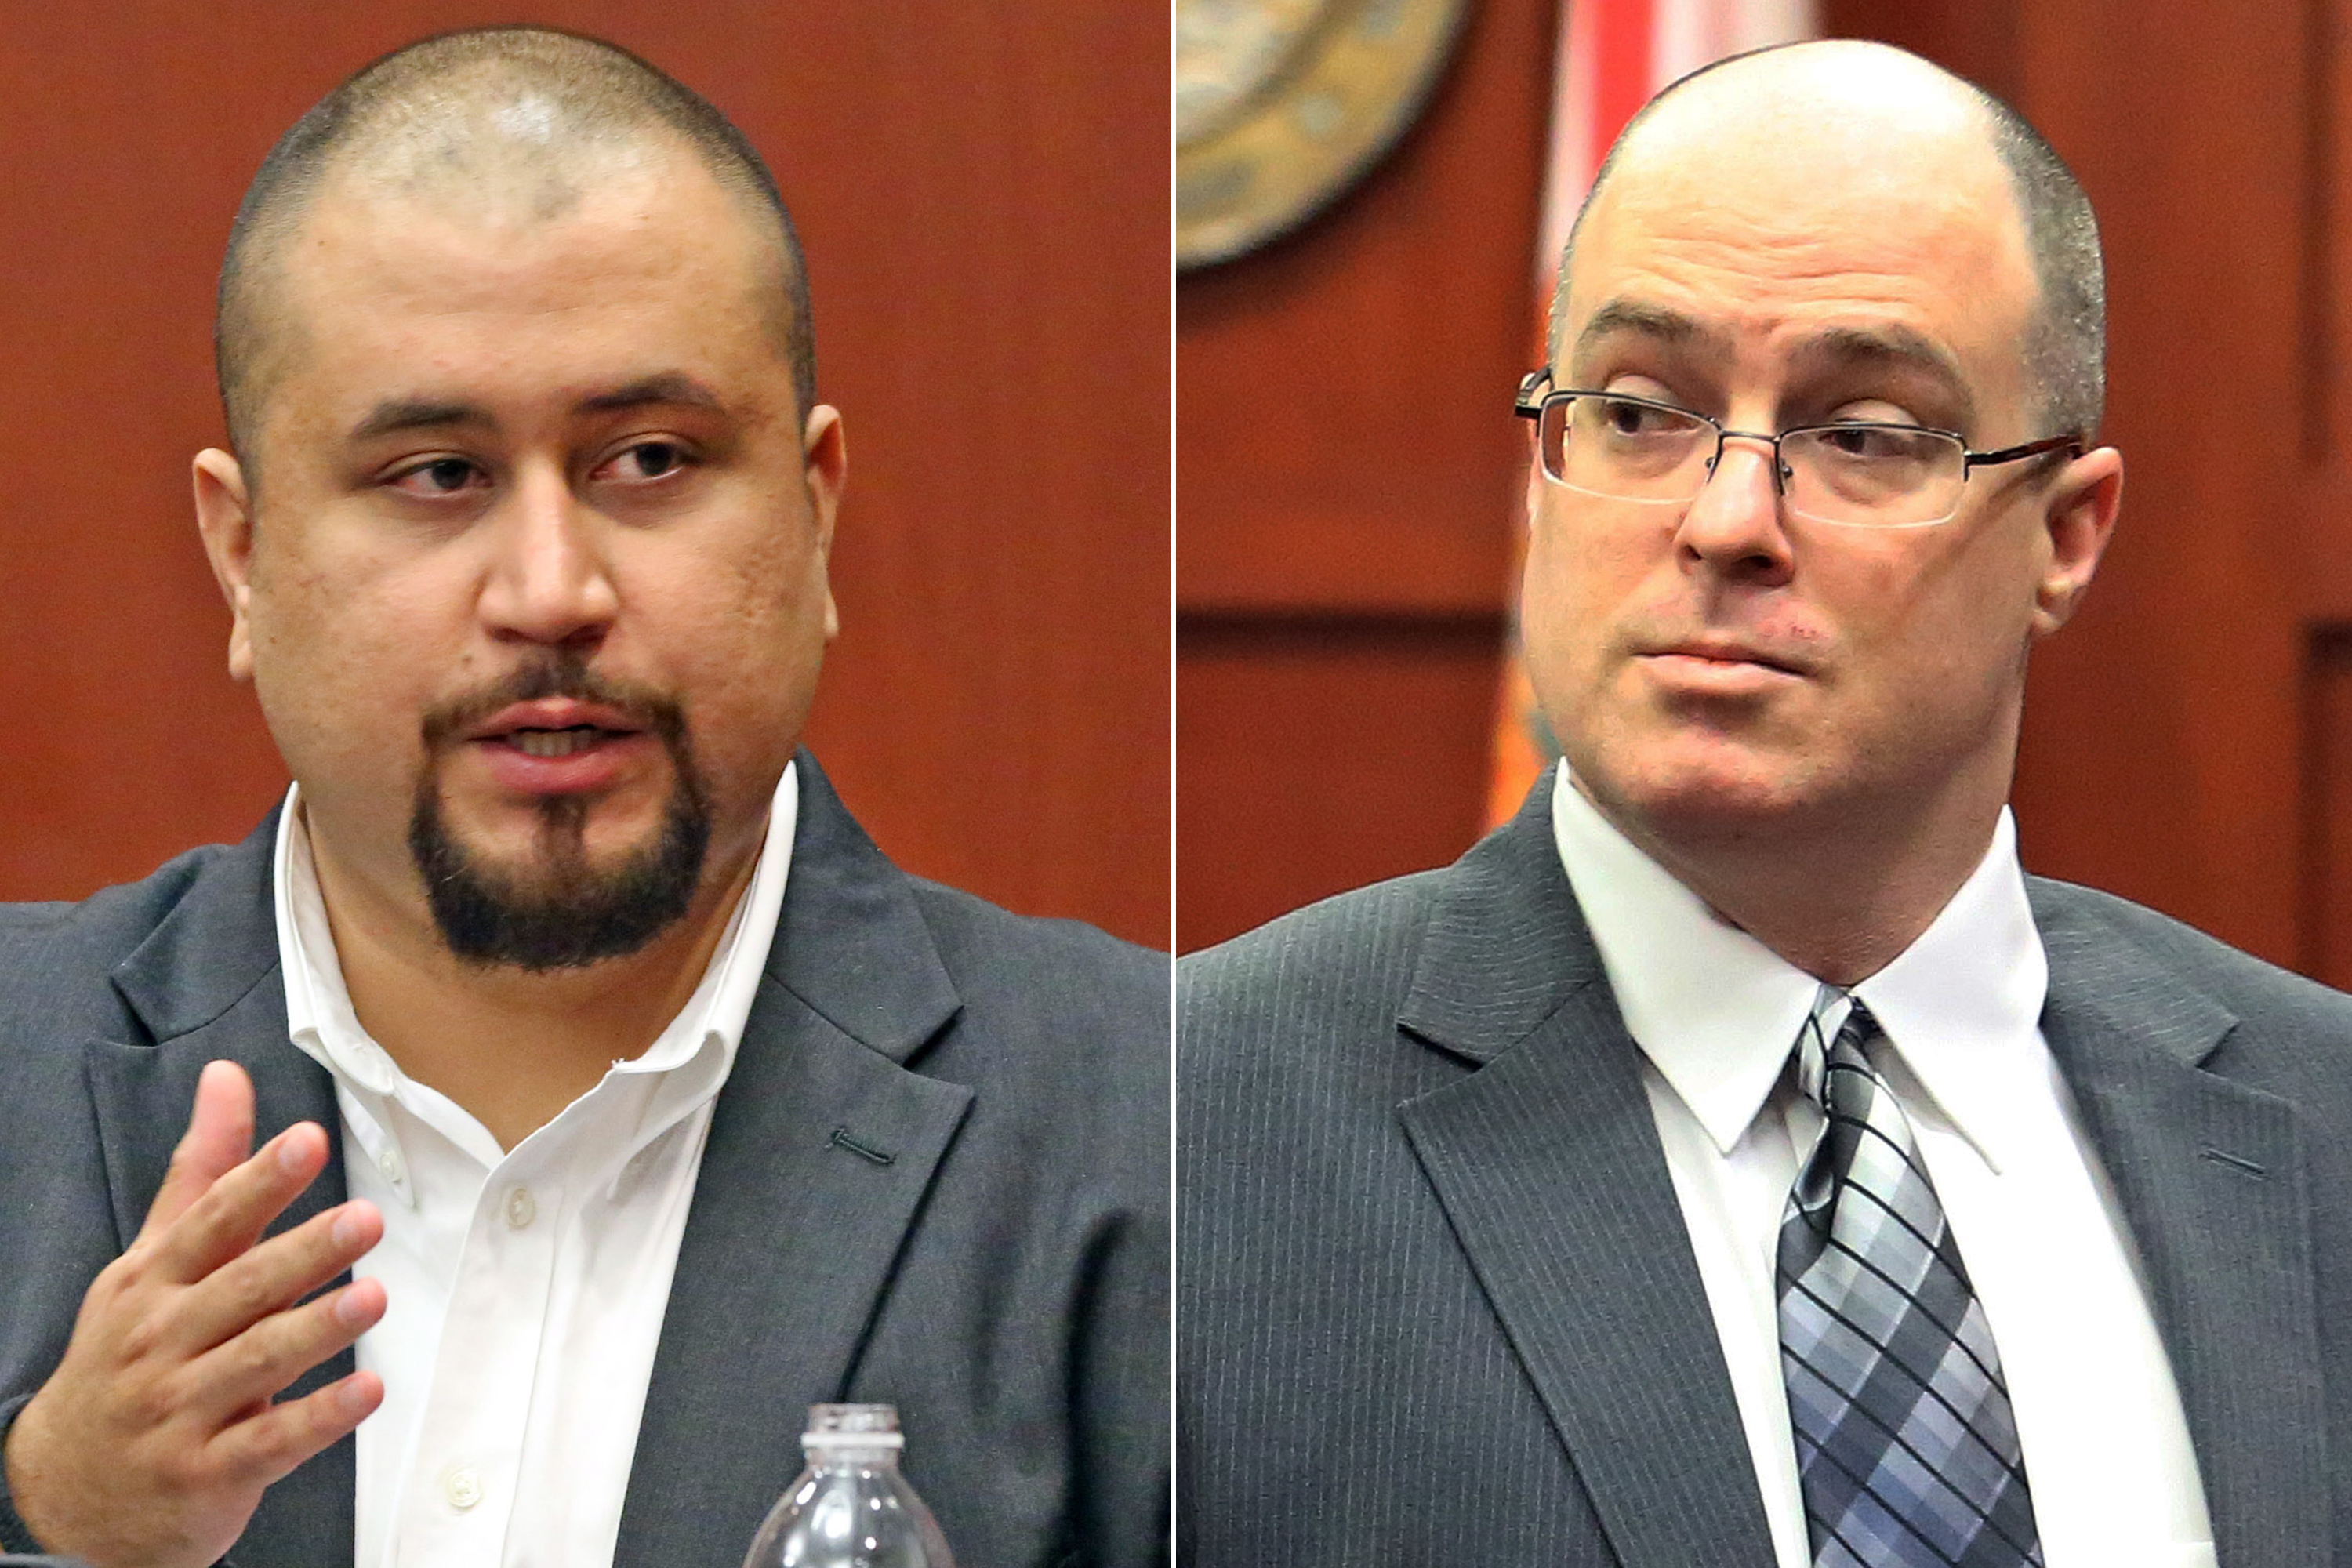 George Zimmerman (l) and Matthew Apperson (r) during a trial at Seminole County courtroom in Sanford, Fla., on Sept. 16, 2016. Apperson is accused of trying to kill George Zimmerman by shooting into his truck during a road rage dispute on Lake Mary Boulevard last year. (Red Huber—Orlando Sentinel/AP)